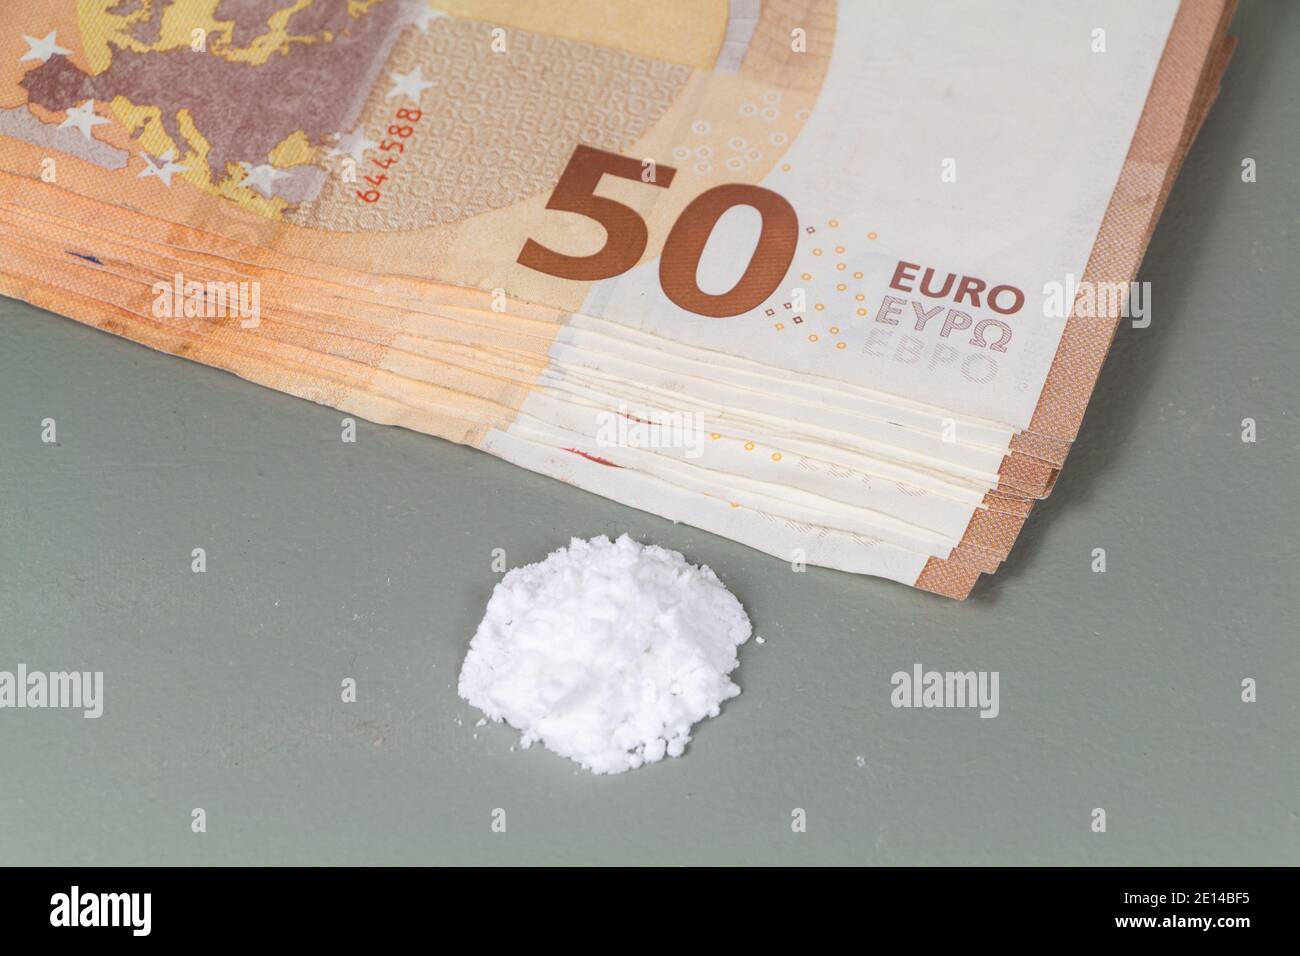 Heap of cocaine and banknotes of fifty euros Stock Photo